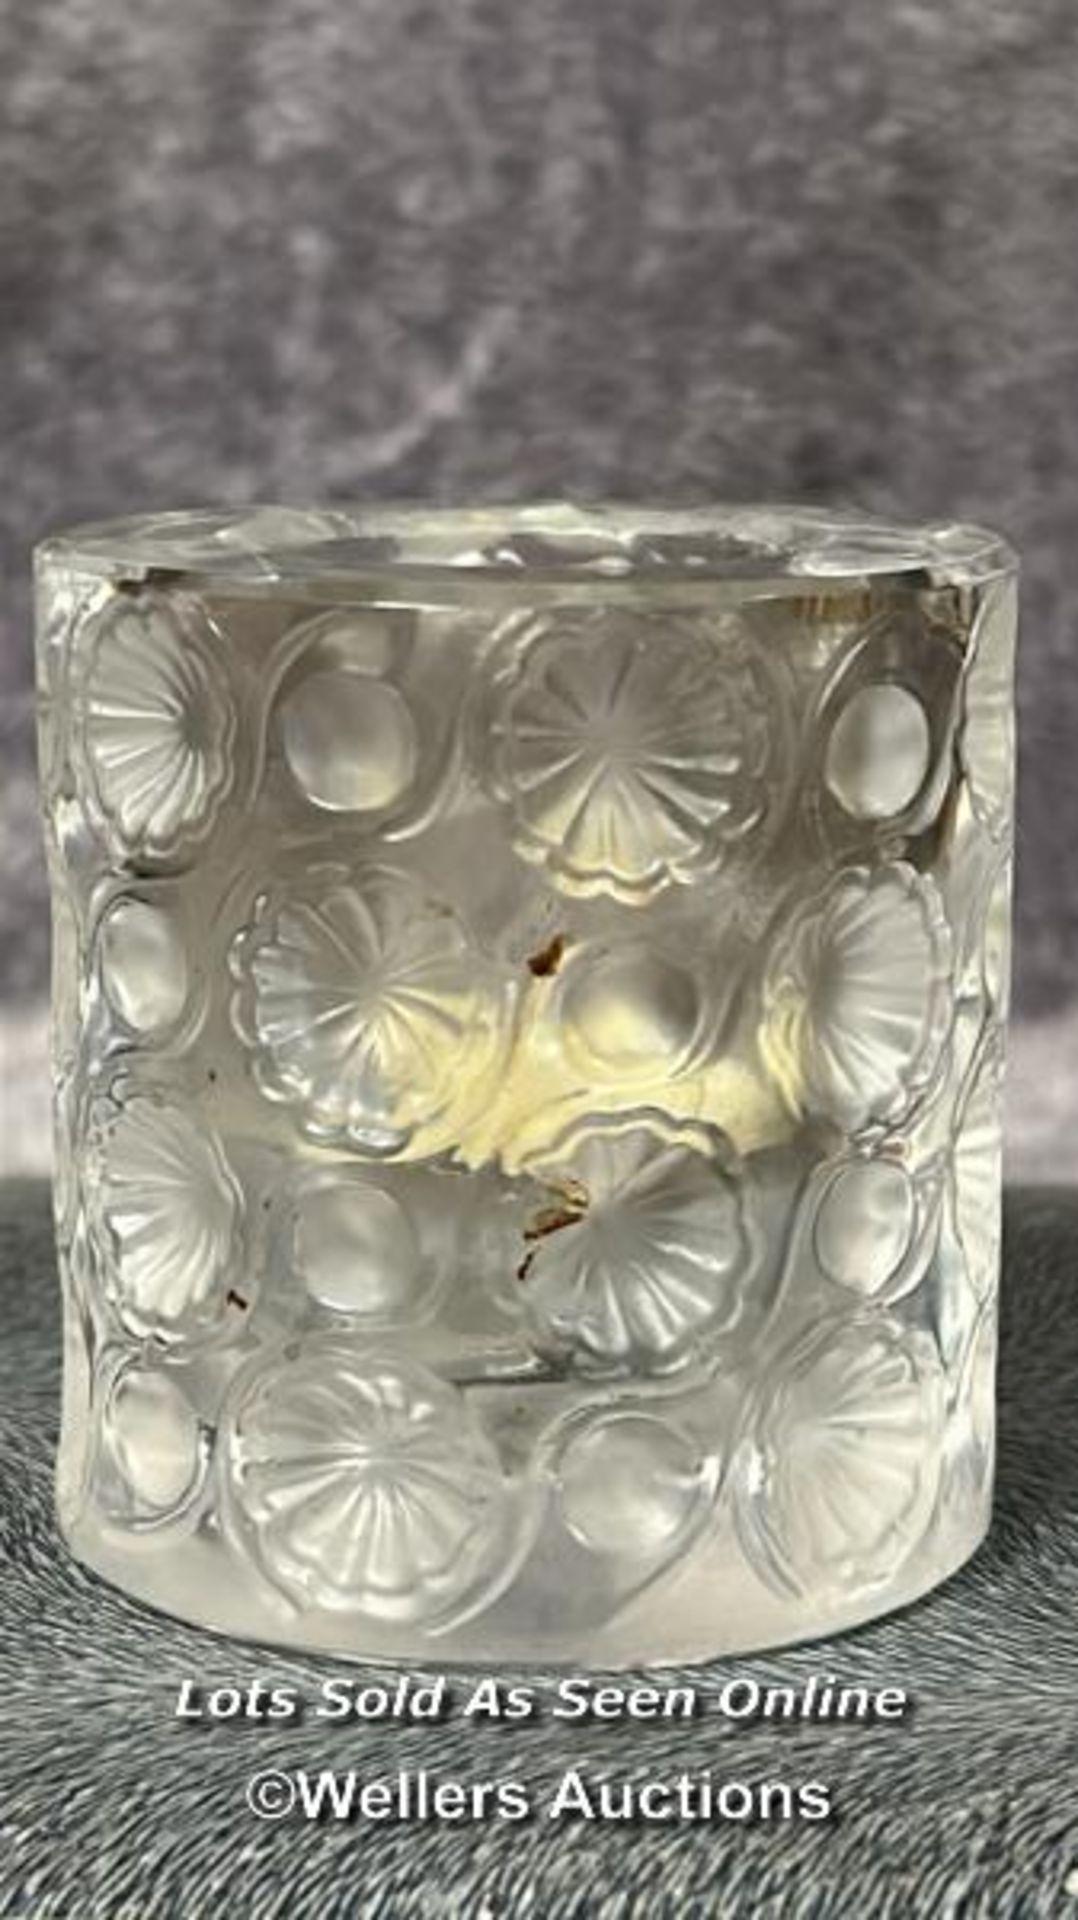 Small Lalique 'Two Flowers' perfume bottle (stopper does not come out) with a Lalique candle - Image 5 of 7